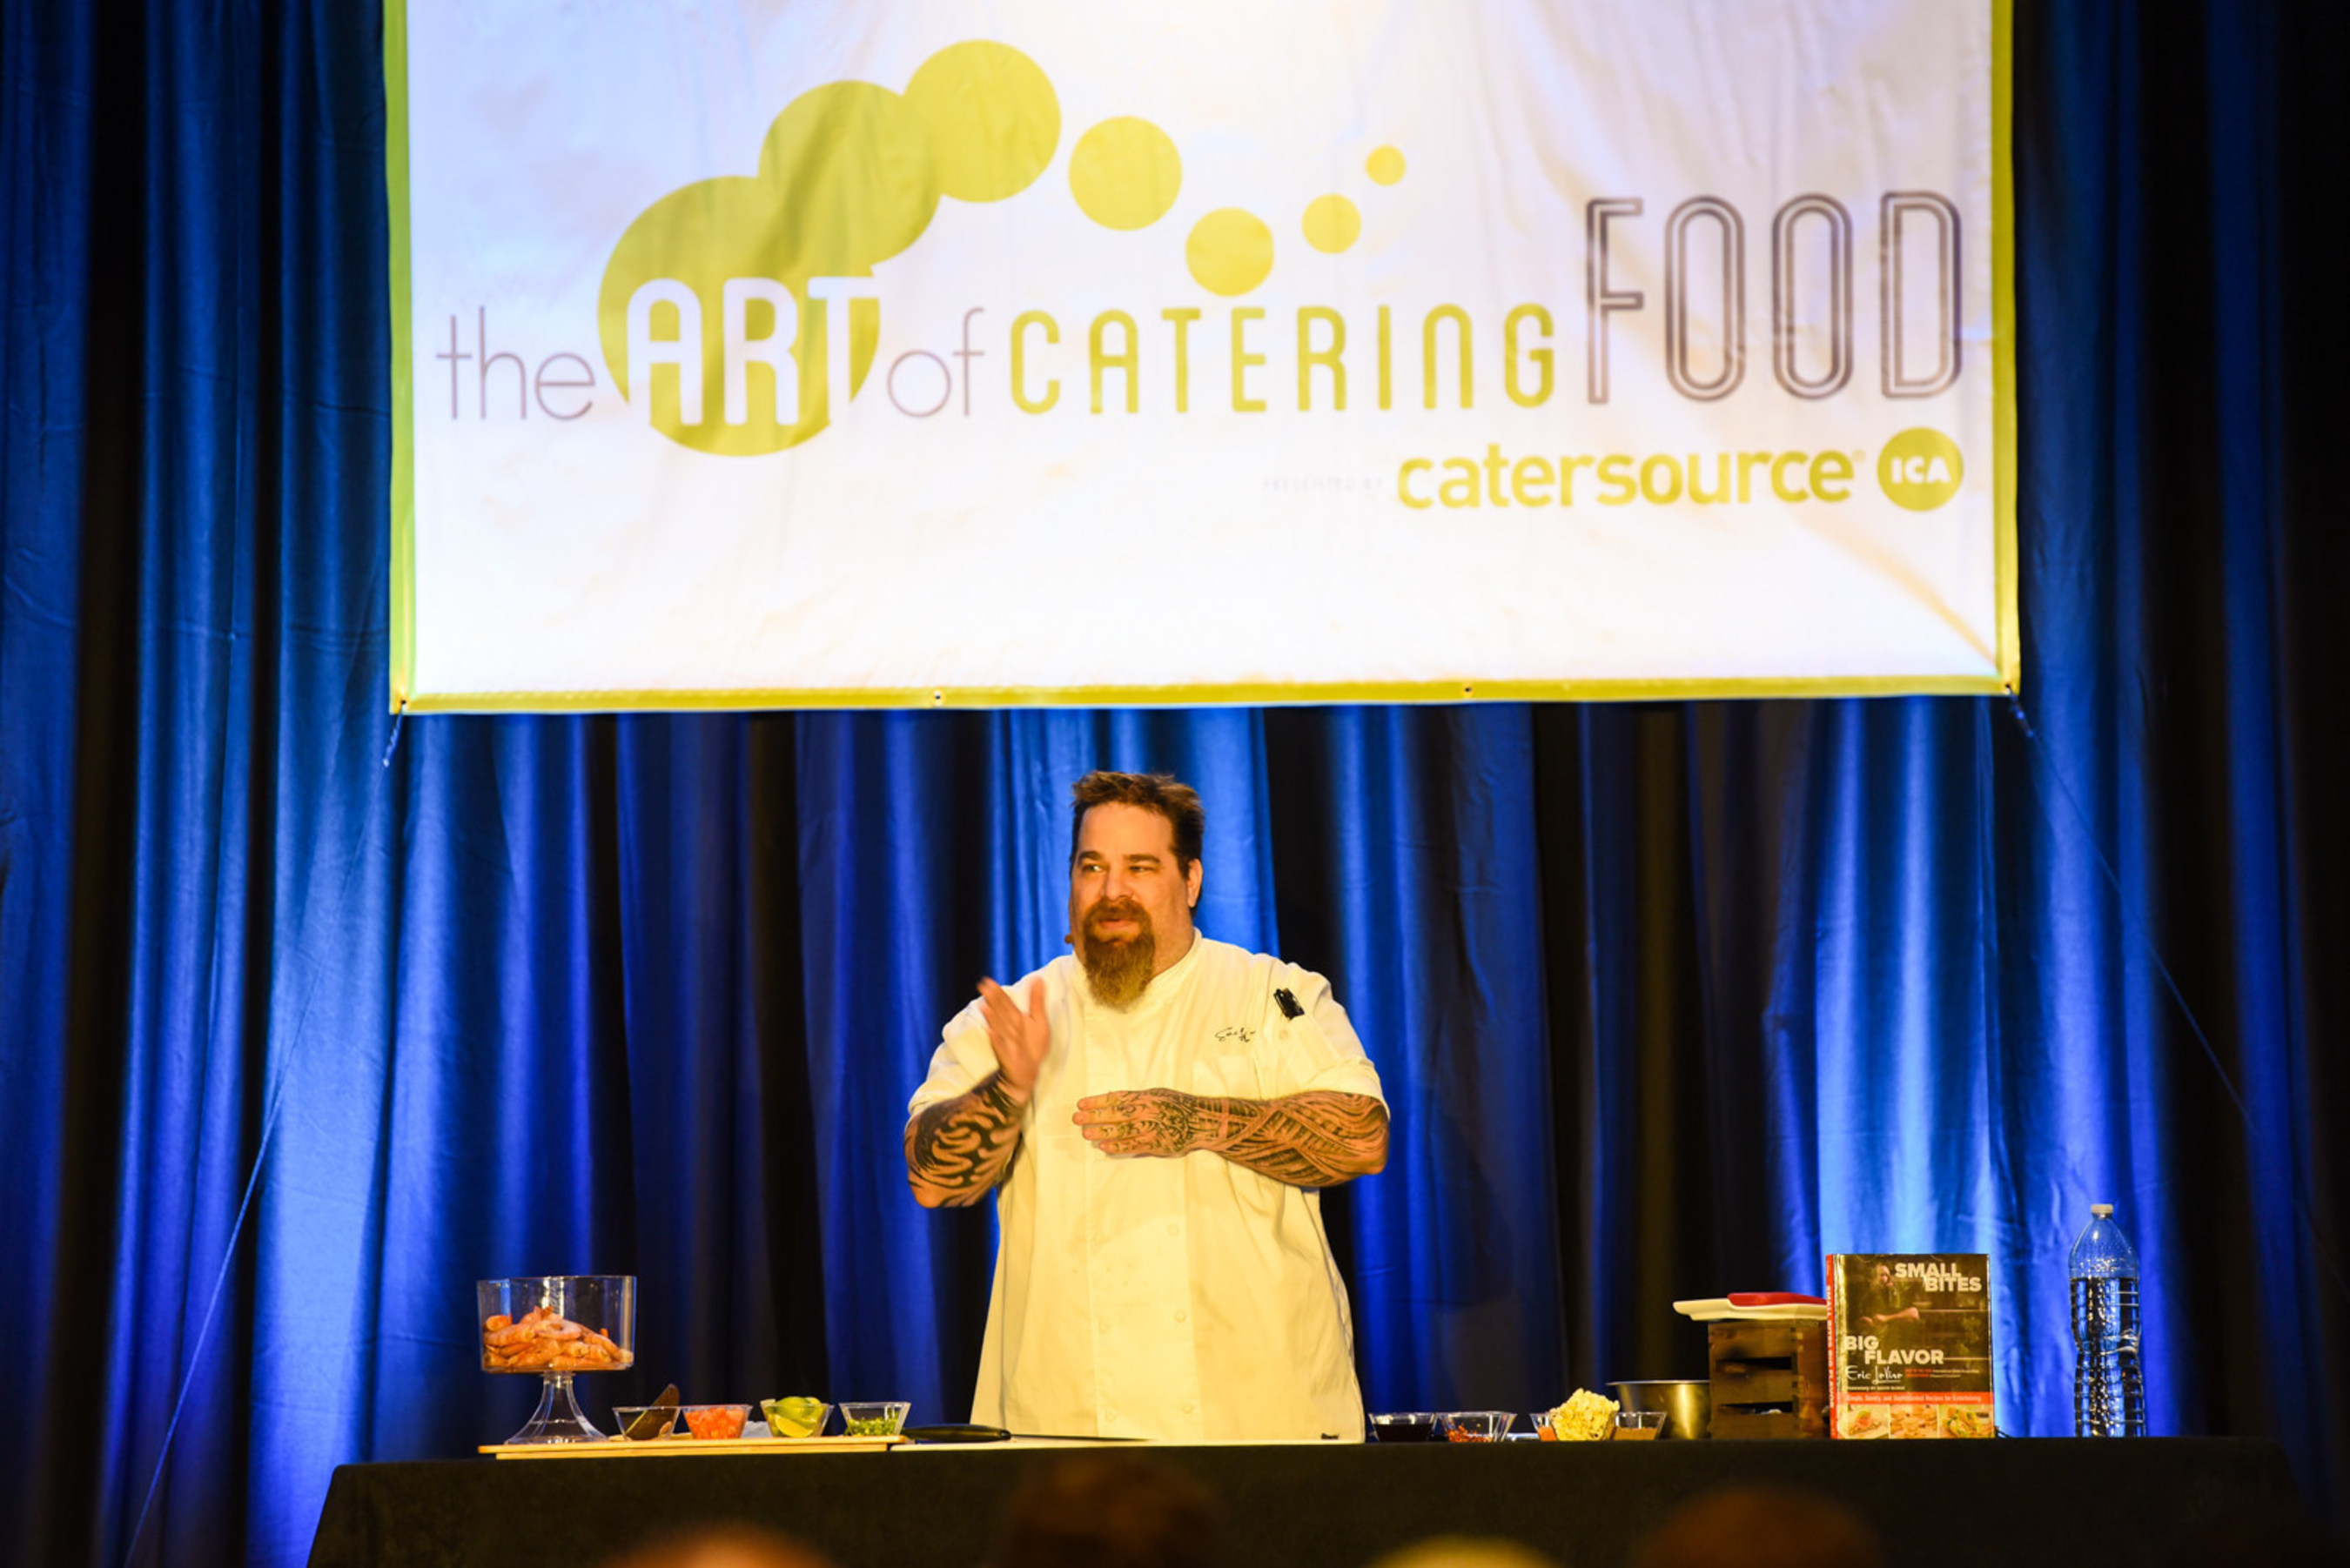 Following the conclusion of the successful 2016 Art of Catering Food event held in Washington, DC, Catersource and the International Caterers Association (ICA) announce that the renowned culinary training program will join the flagship Catersource show in March 2017.